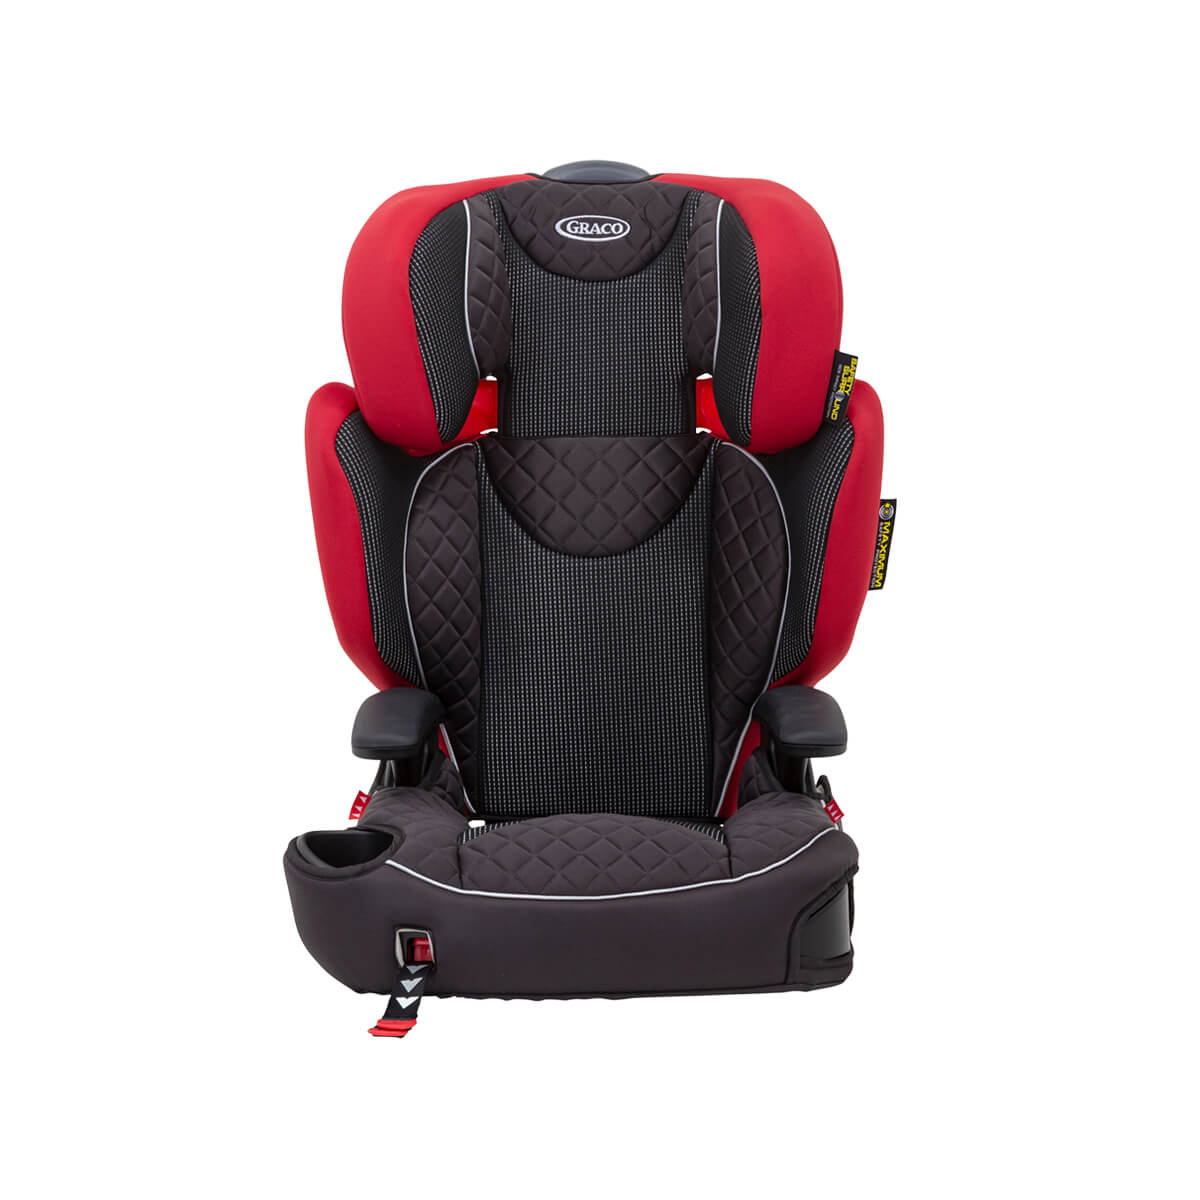 Graco Affix red highback booster front angle